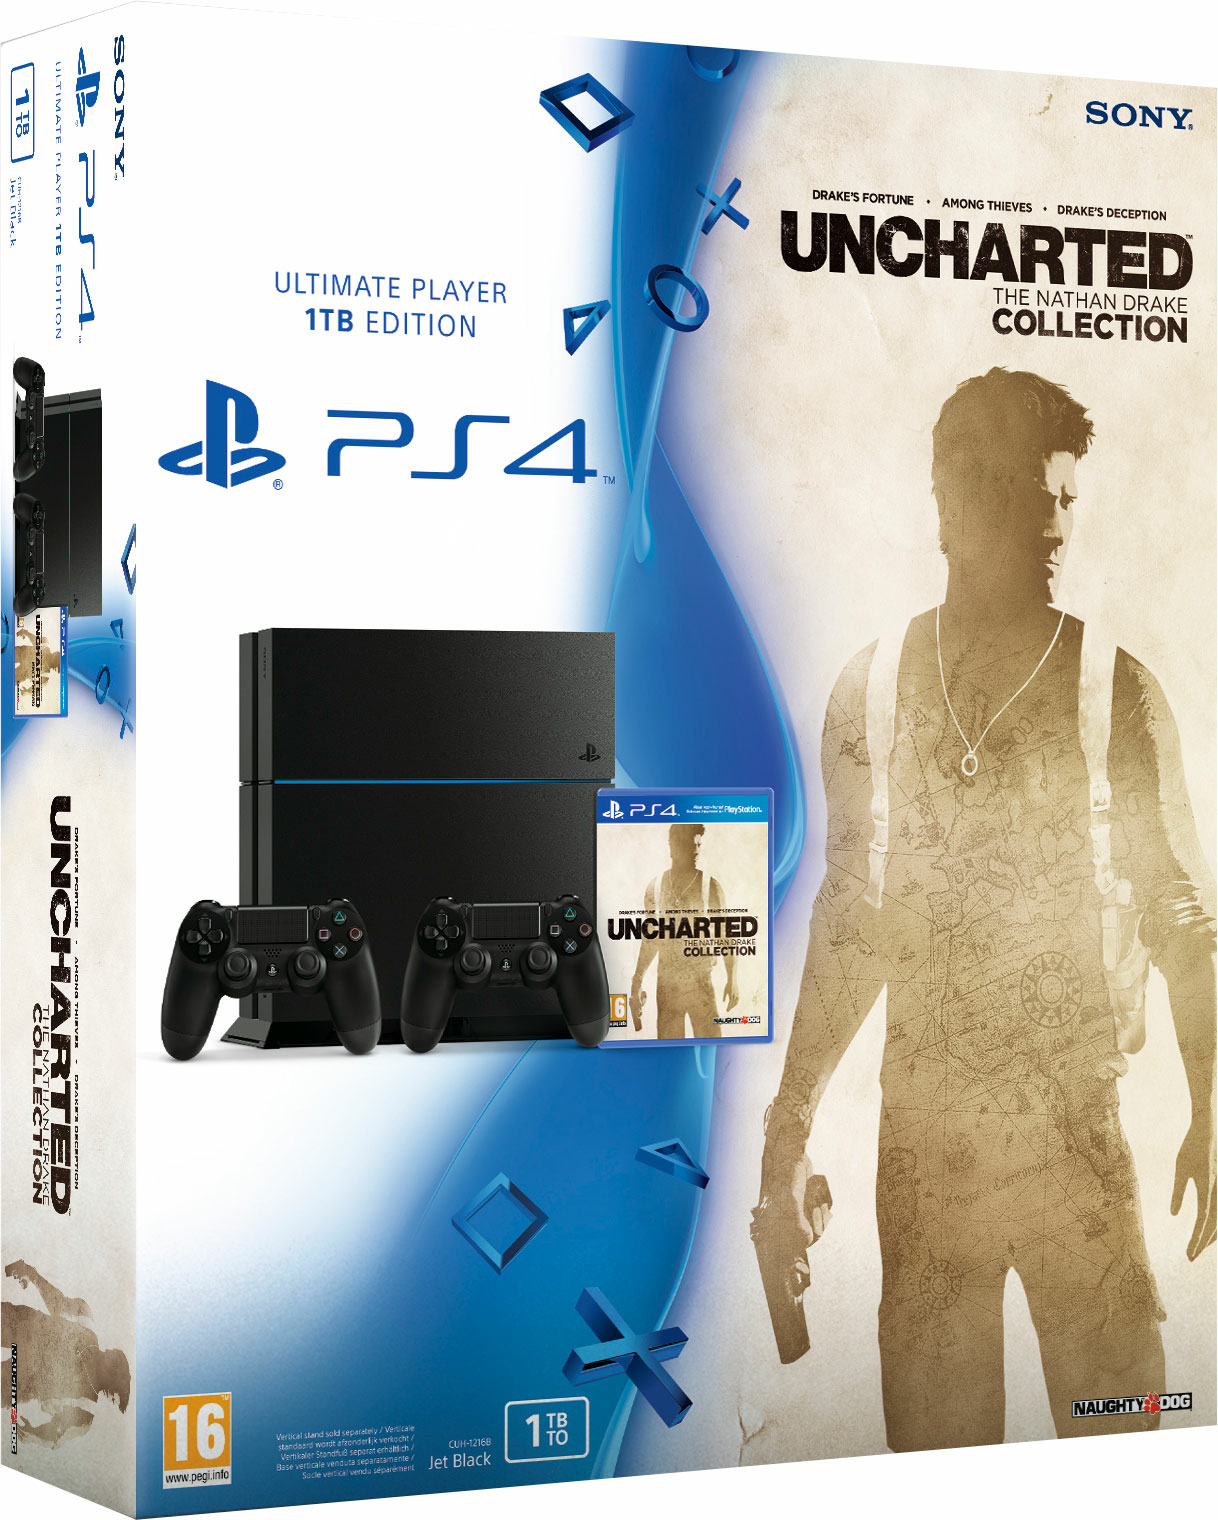 Игра uncharted collection. Uncharted коллекция ps4. Uncharted 1 ps4. Uncharted Nathan Drake collection ps4.